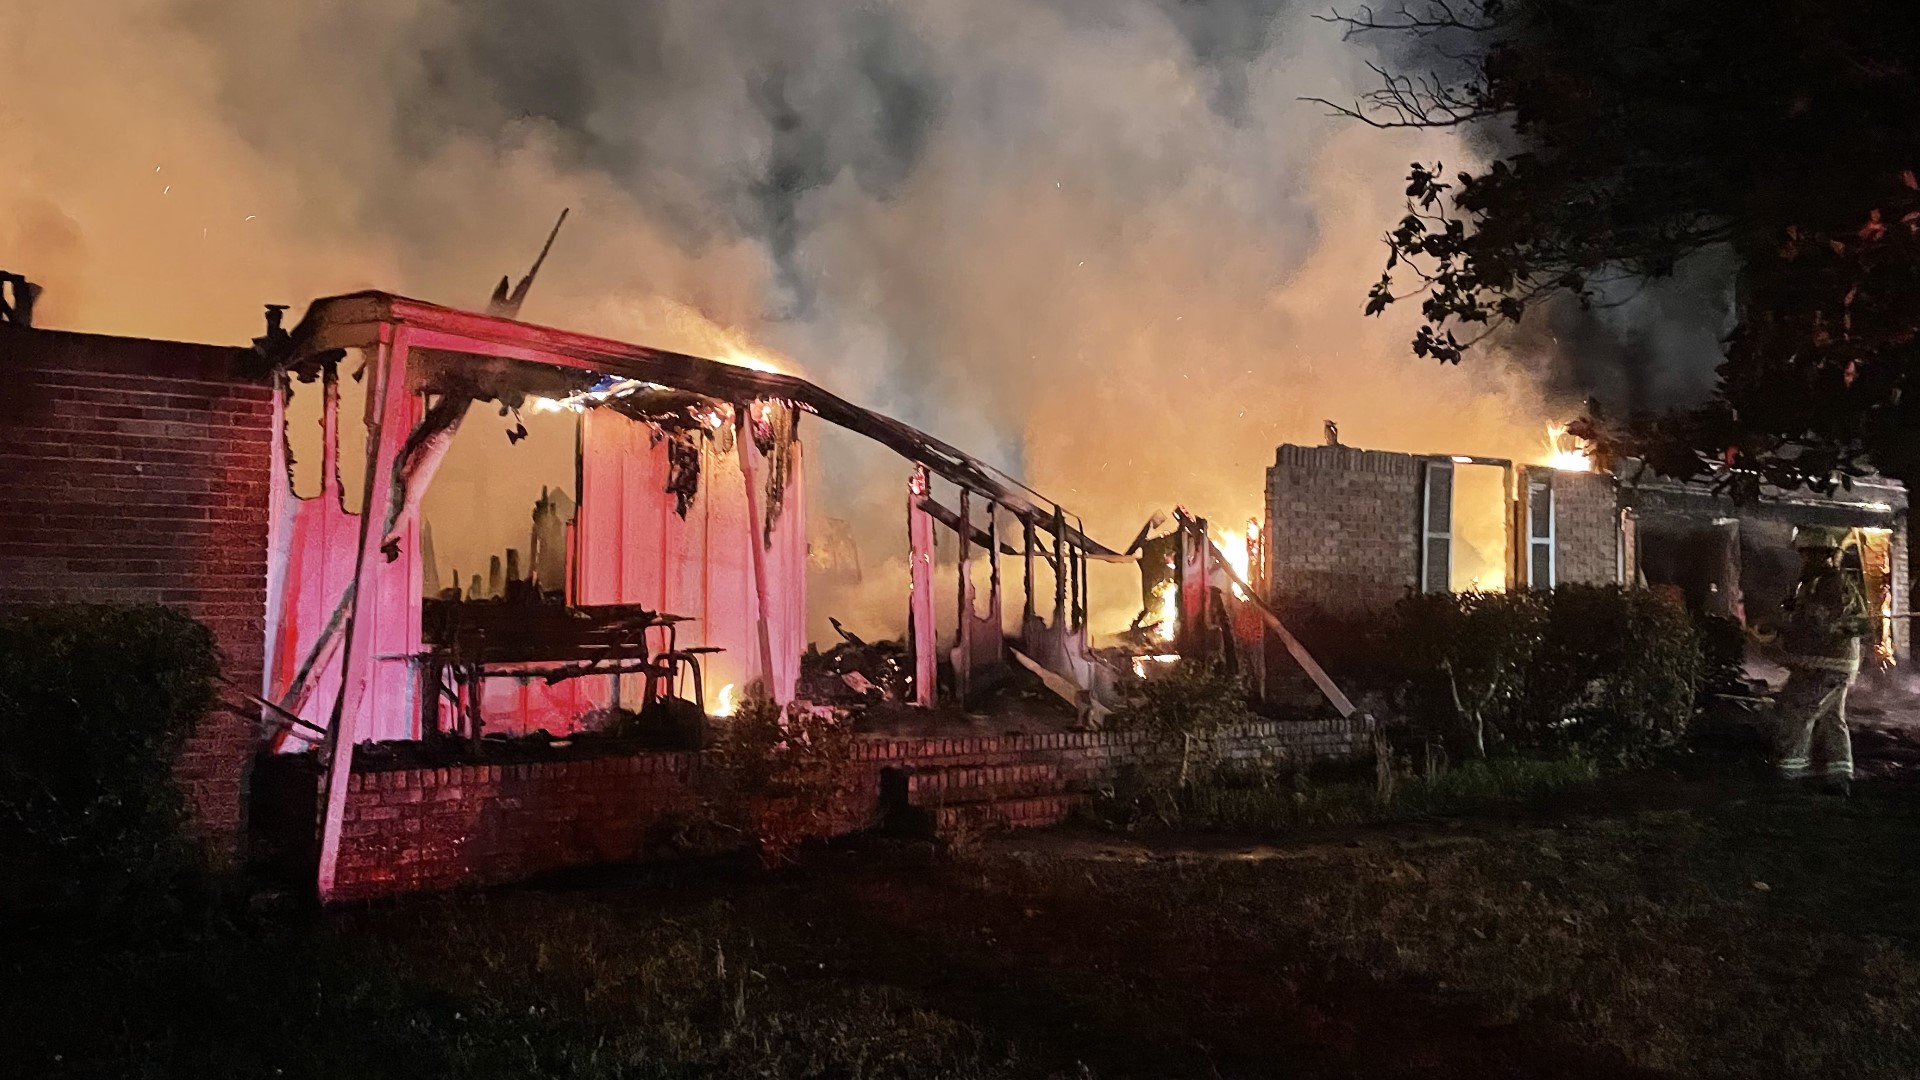 A Fayette County building is now a total loss after it was destroyed in an early Wednesday morning fire.